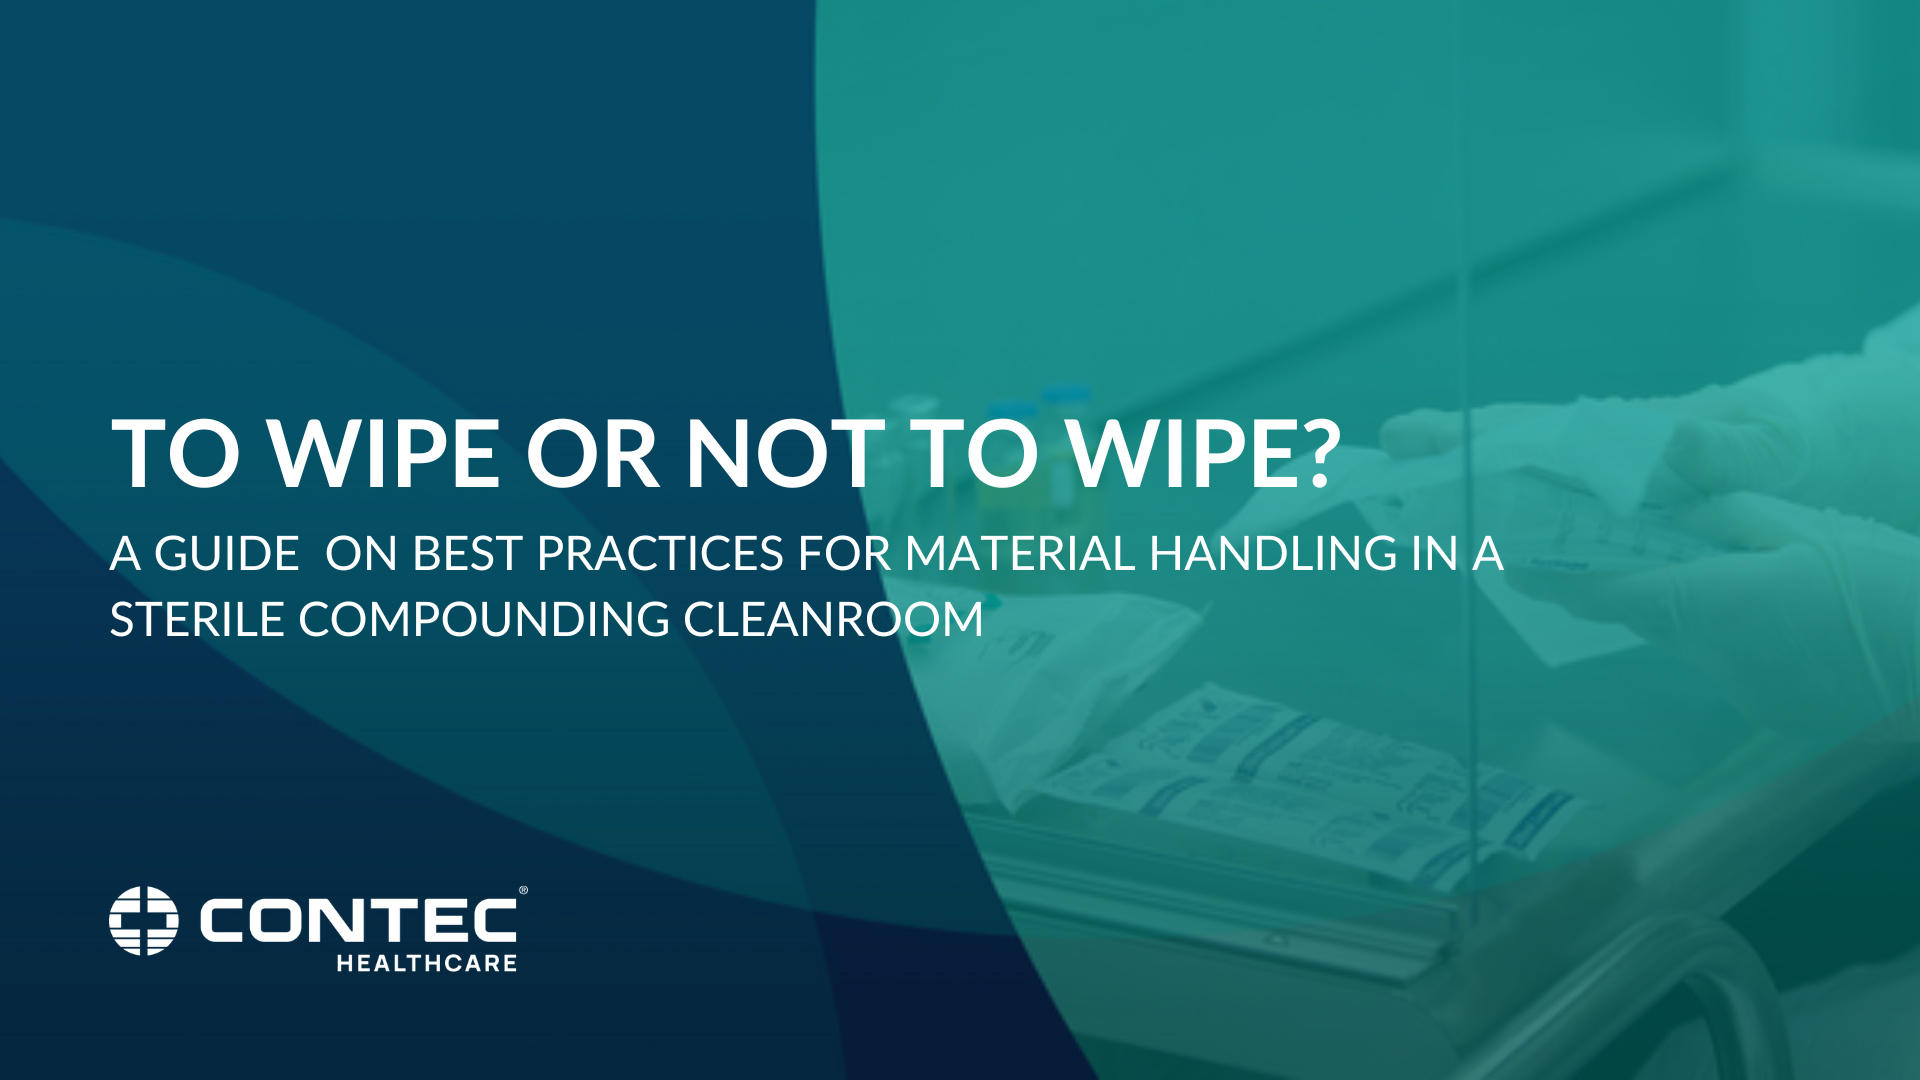 Image of To Wipe or Not to Wipe: A Guide to Material Handling in a Sterile Compounding Cleanroom